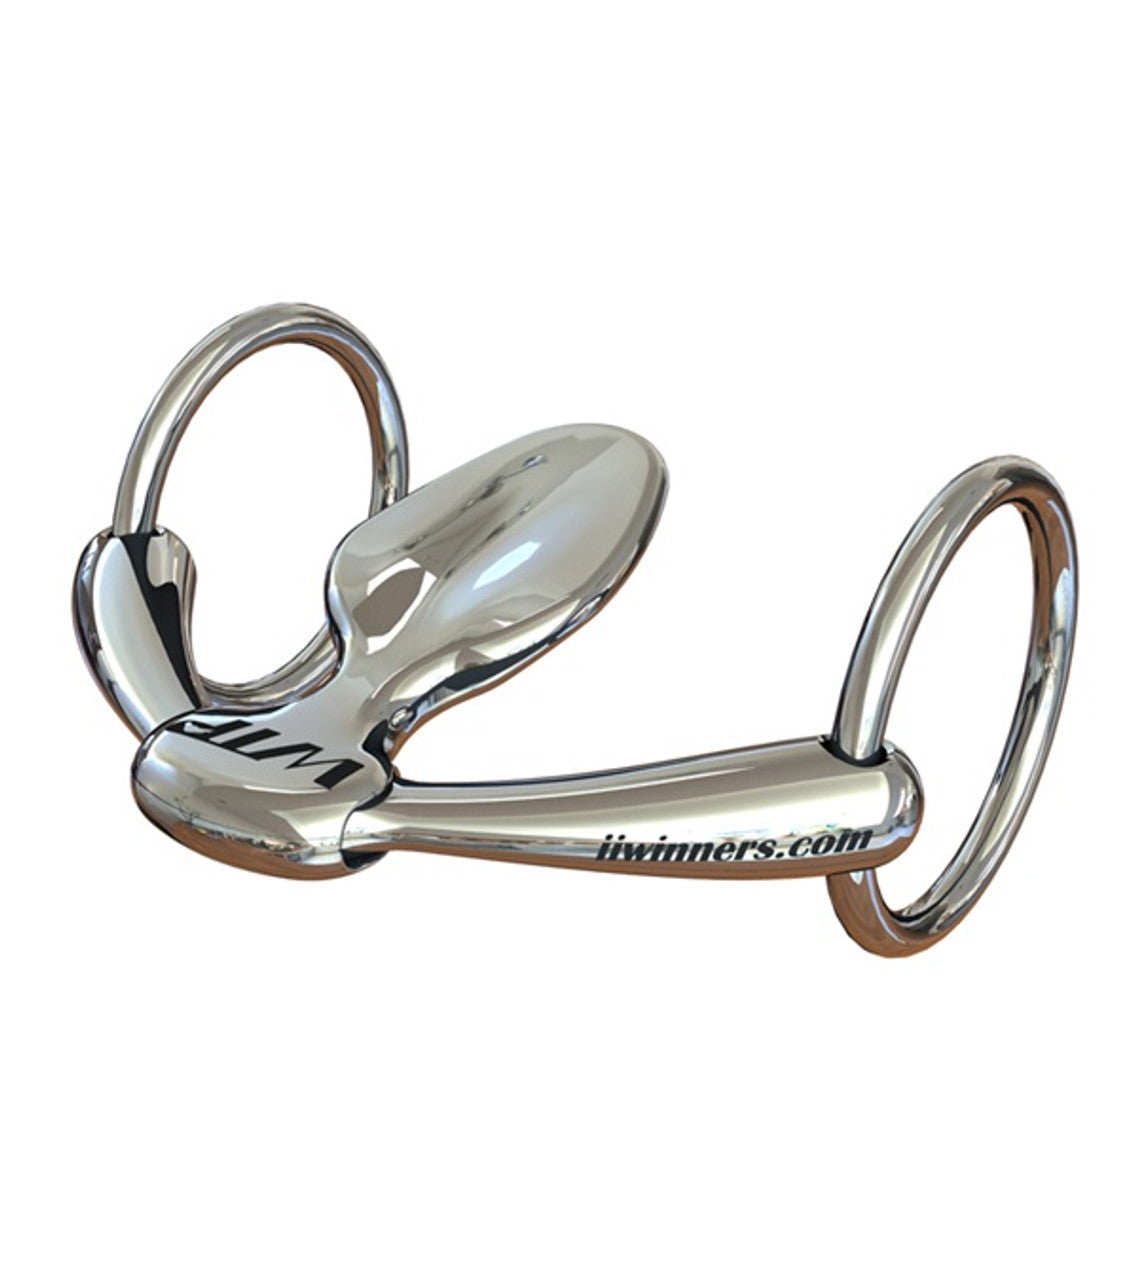 WTP (Winning Tongue Plate) Loose Ring Bit with Extended Plate-TexanSaddles.com